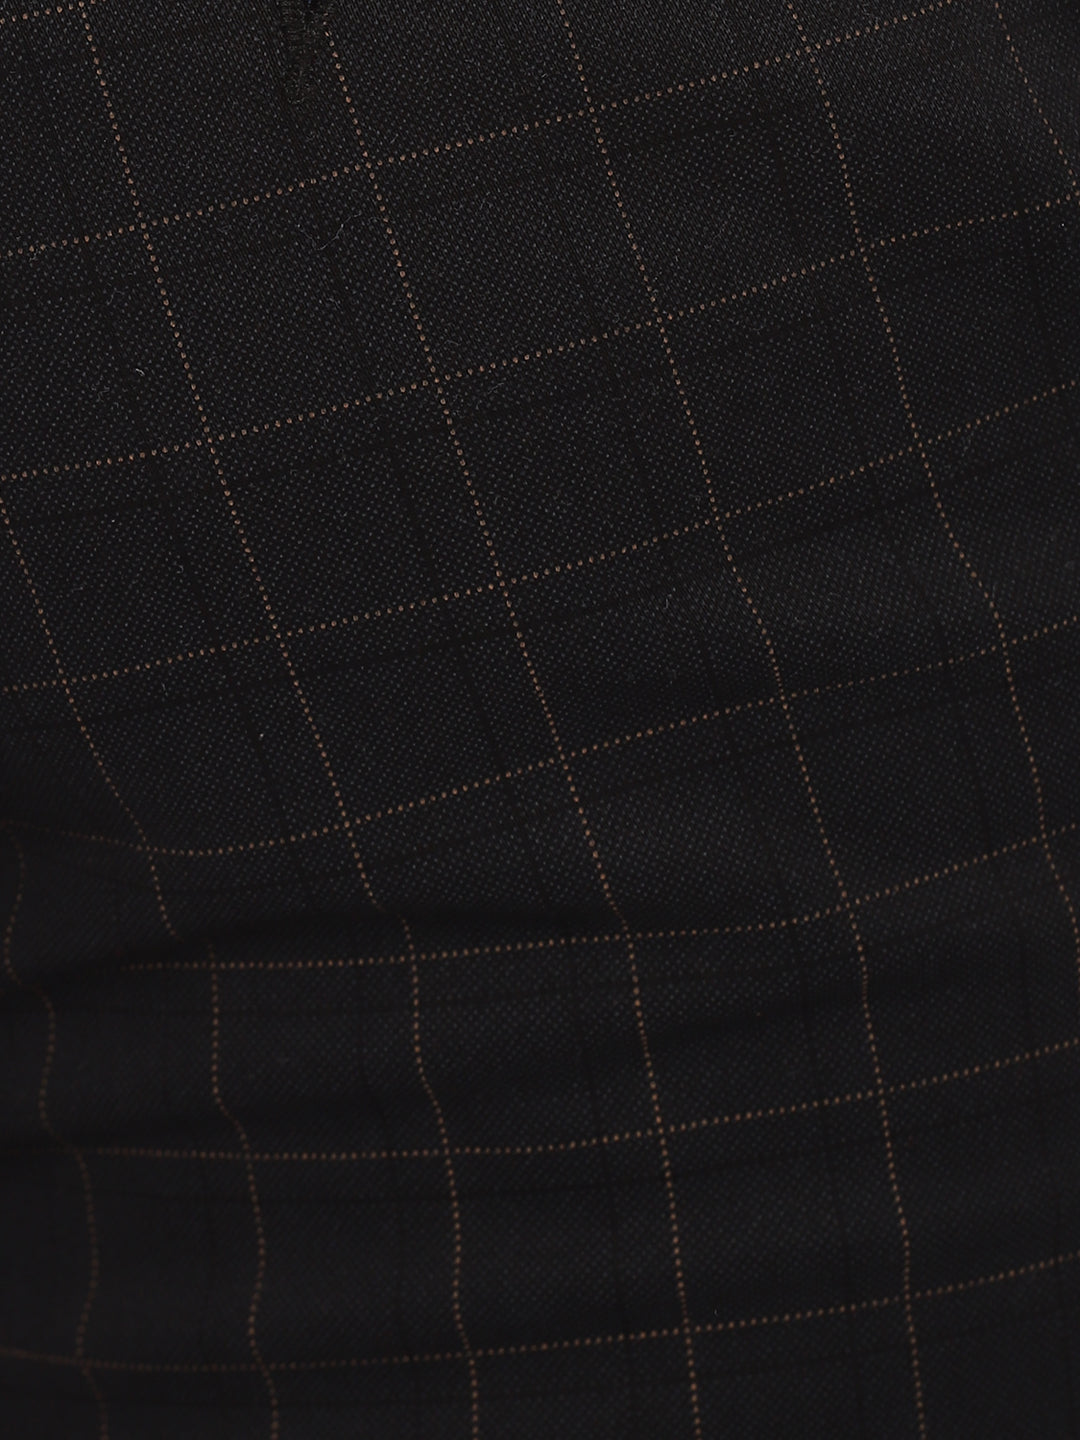 Black Checked Ultra Slim Fit Trouser